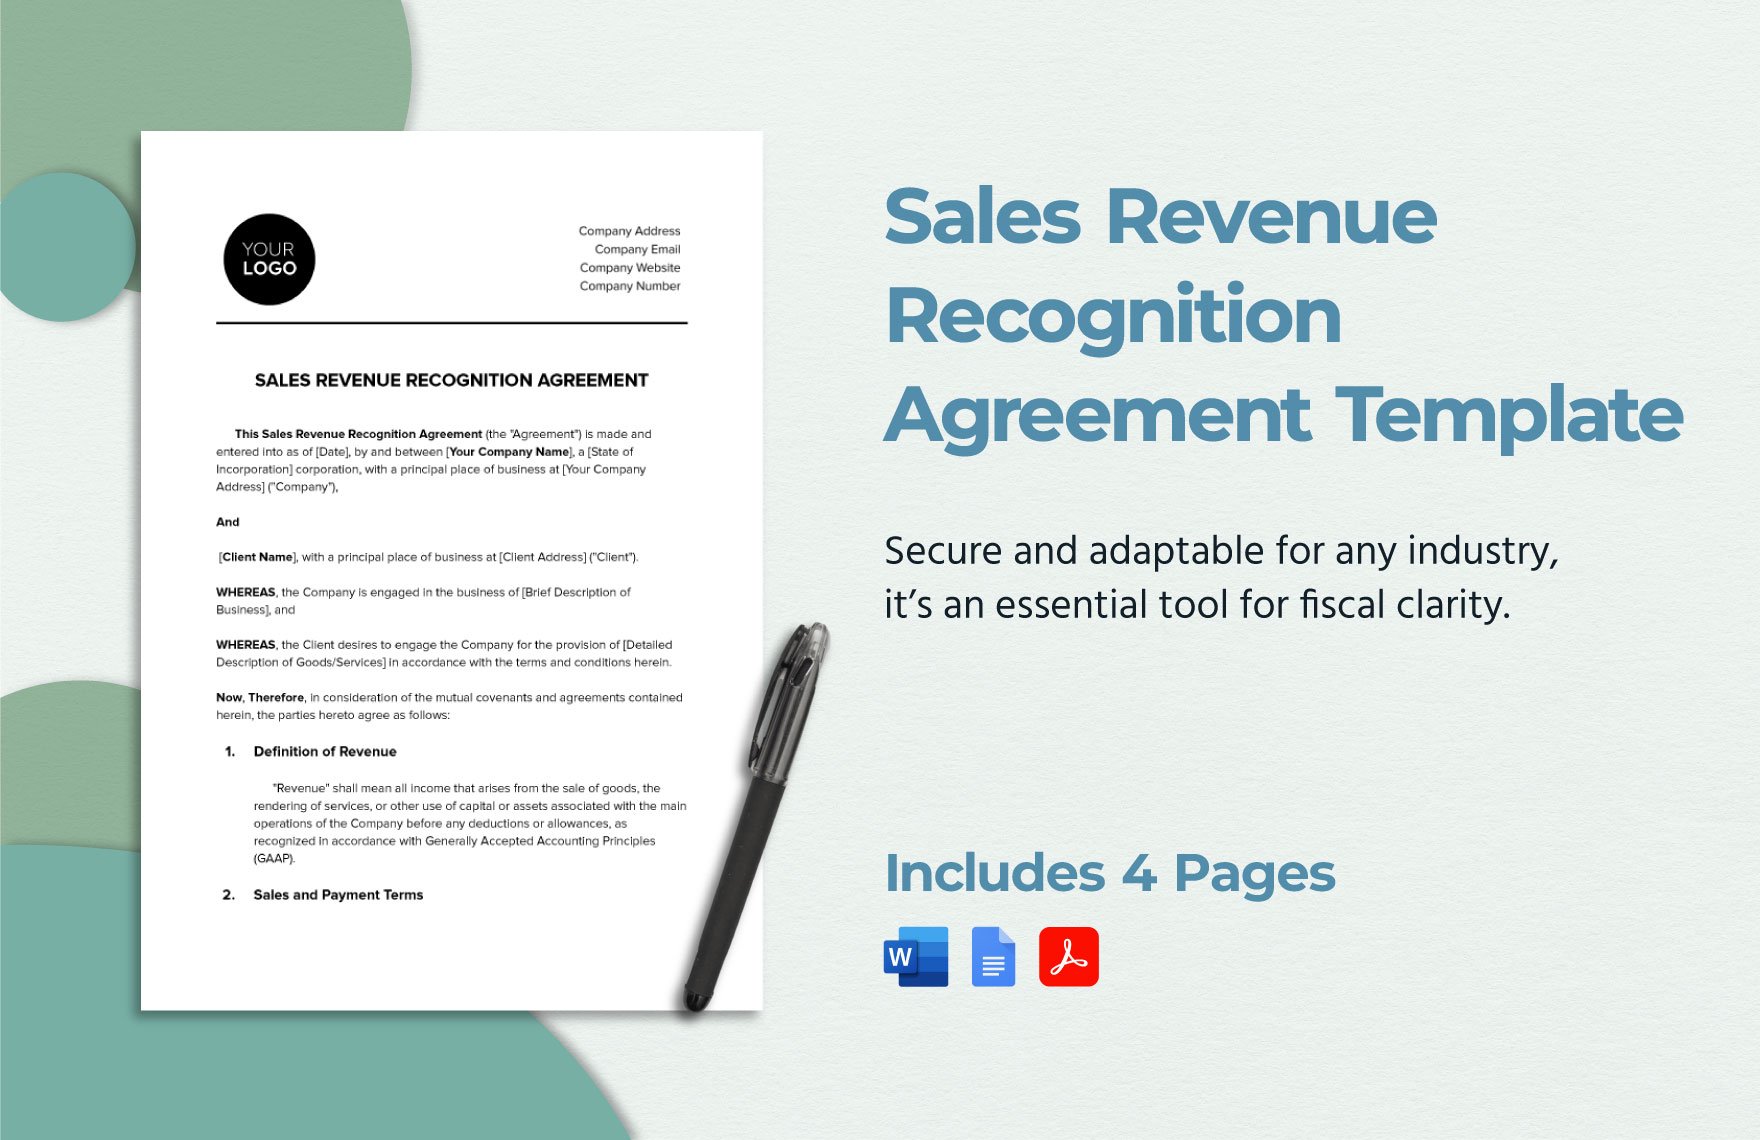 Sales Revenue Recognition Agreement Template in Word, Google Docs, PDF